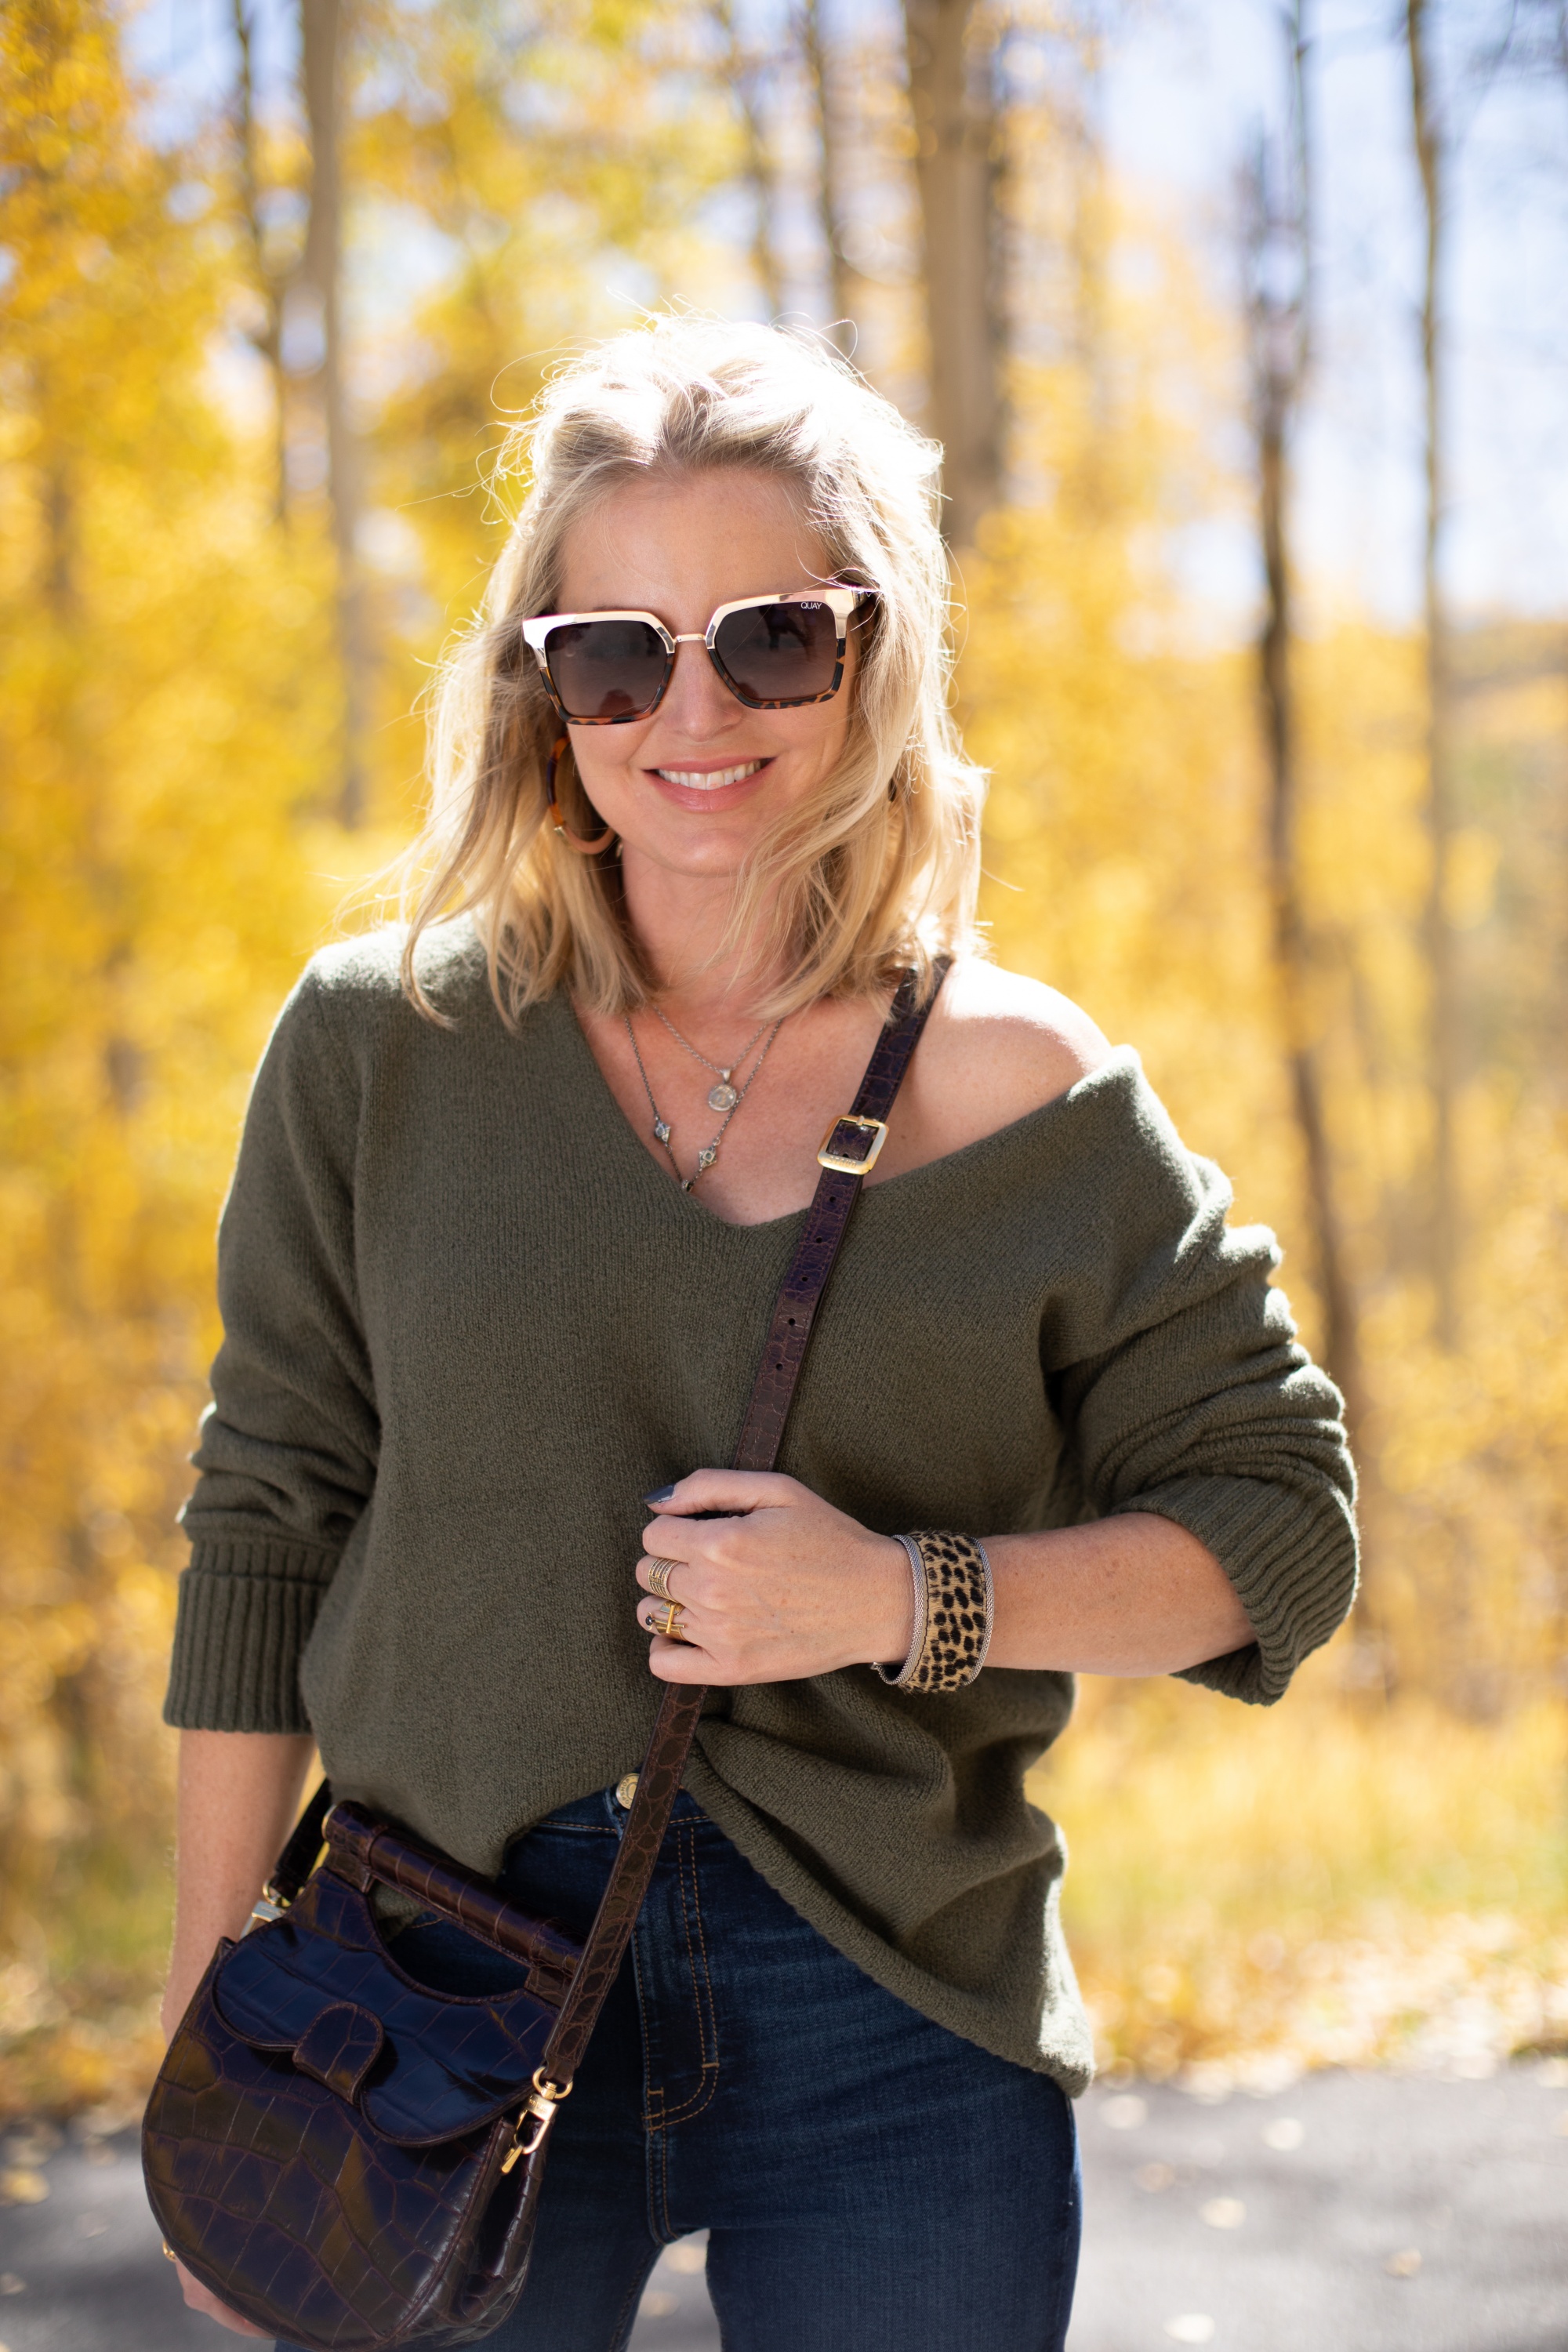 Shoes For Busy Women, Fashion blogger Erin Busbee of BusbeeStyle.com wearing Linea Paolo Wisteria Buckle Wedge Sandals with rag & bone skinny jeans, Something Navy green sweater, Staud Madeline Croc Embossed crossbody, and Quay sunglasses in Telluride, CO